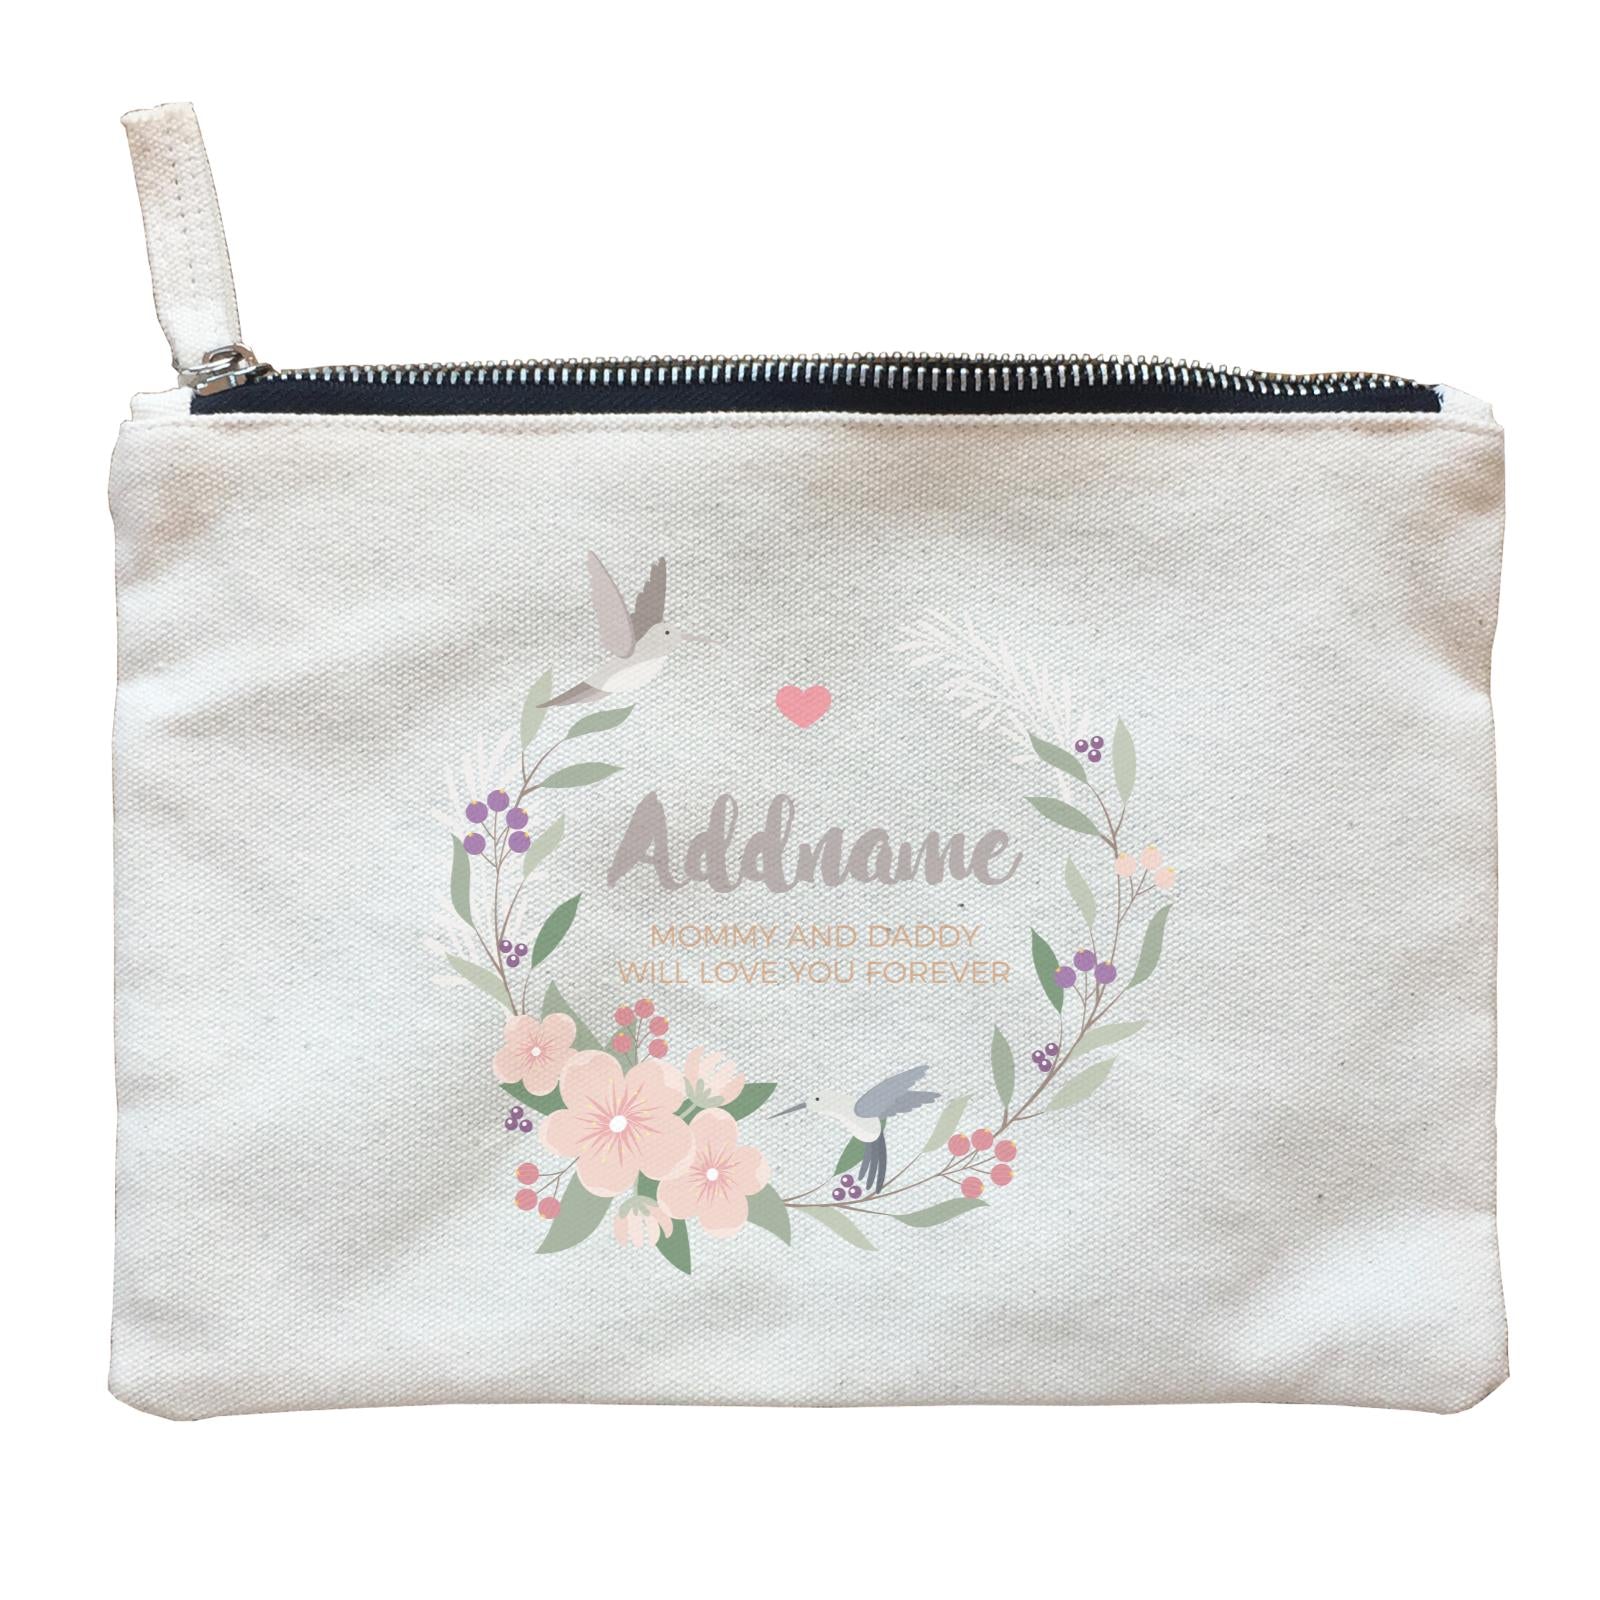 Pink Flower Berries Wreath and Hummingbirds Personalizable with Name and Text Zipper Pouch